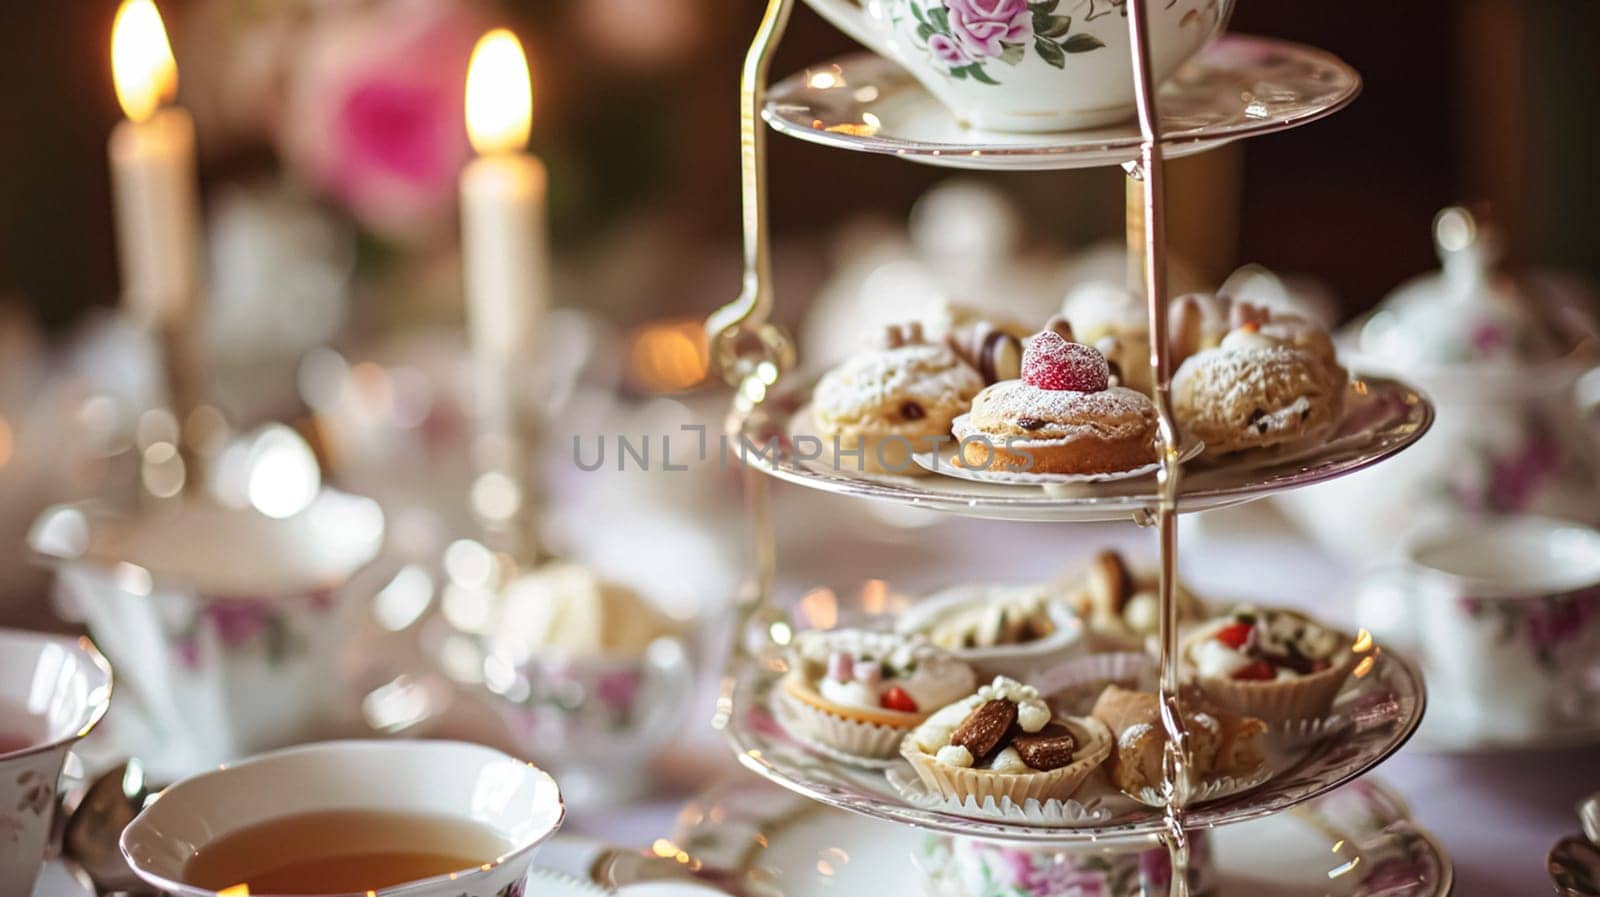 Elegant table setting for tea party with cakes and cupcakes in English manor. Vintage style. by Olayola